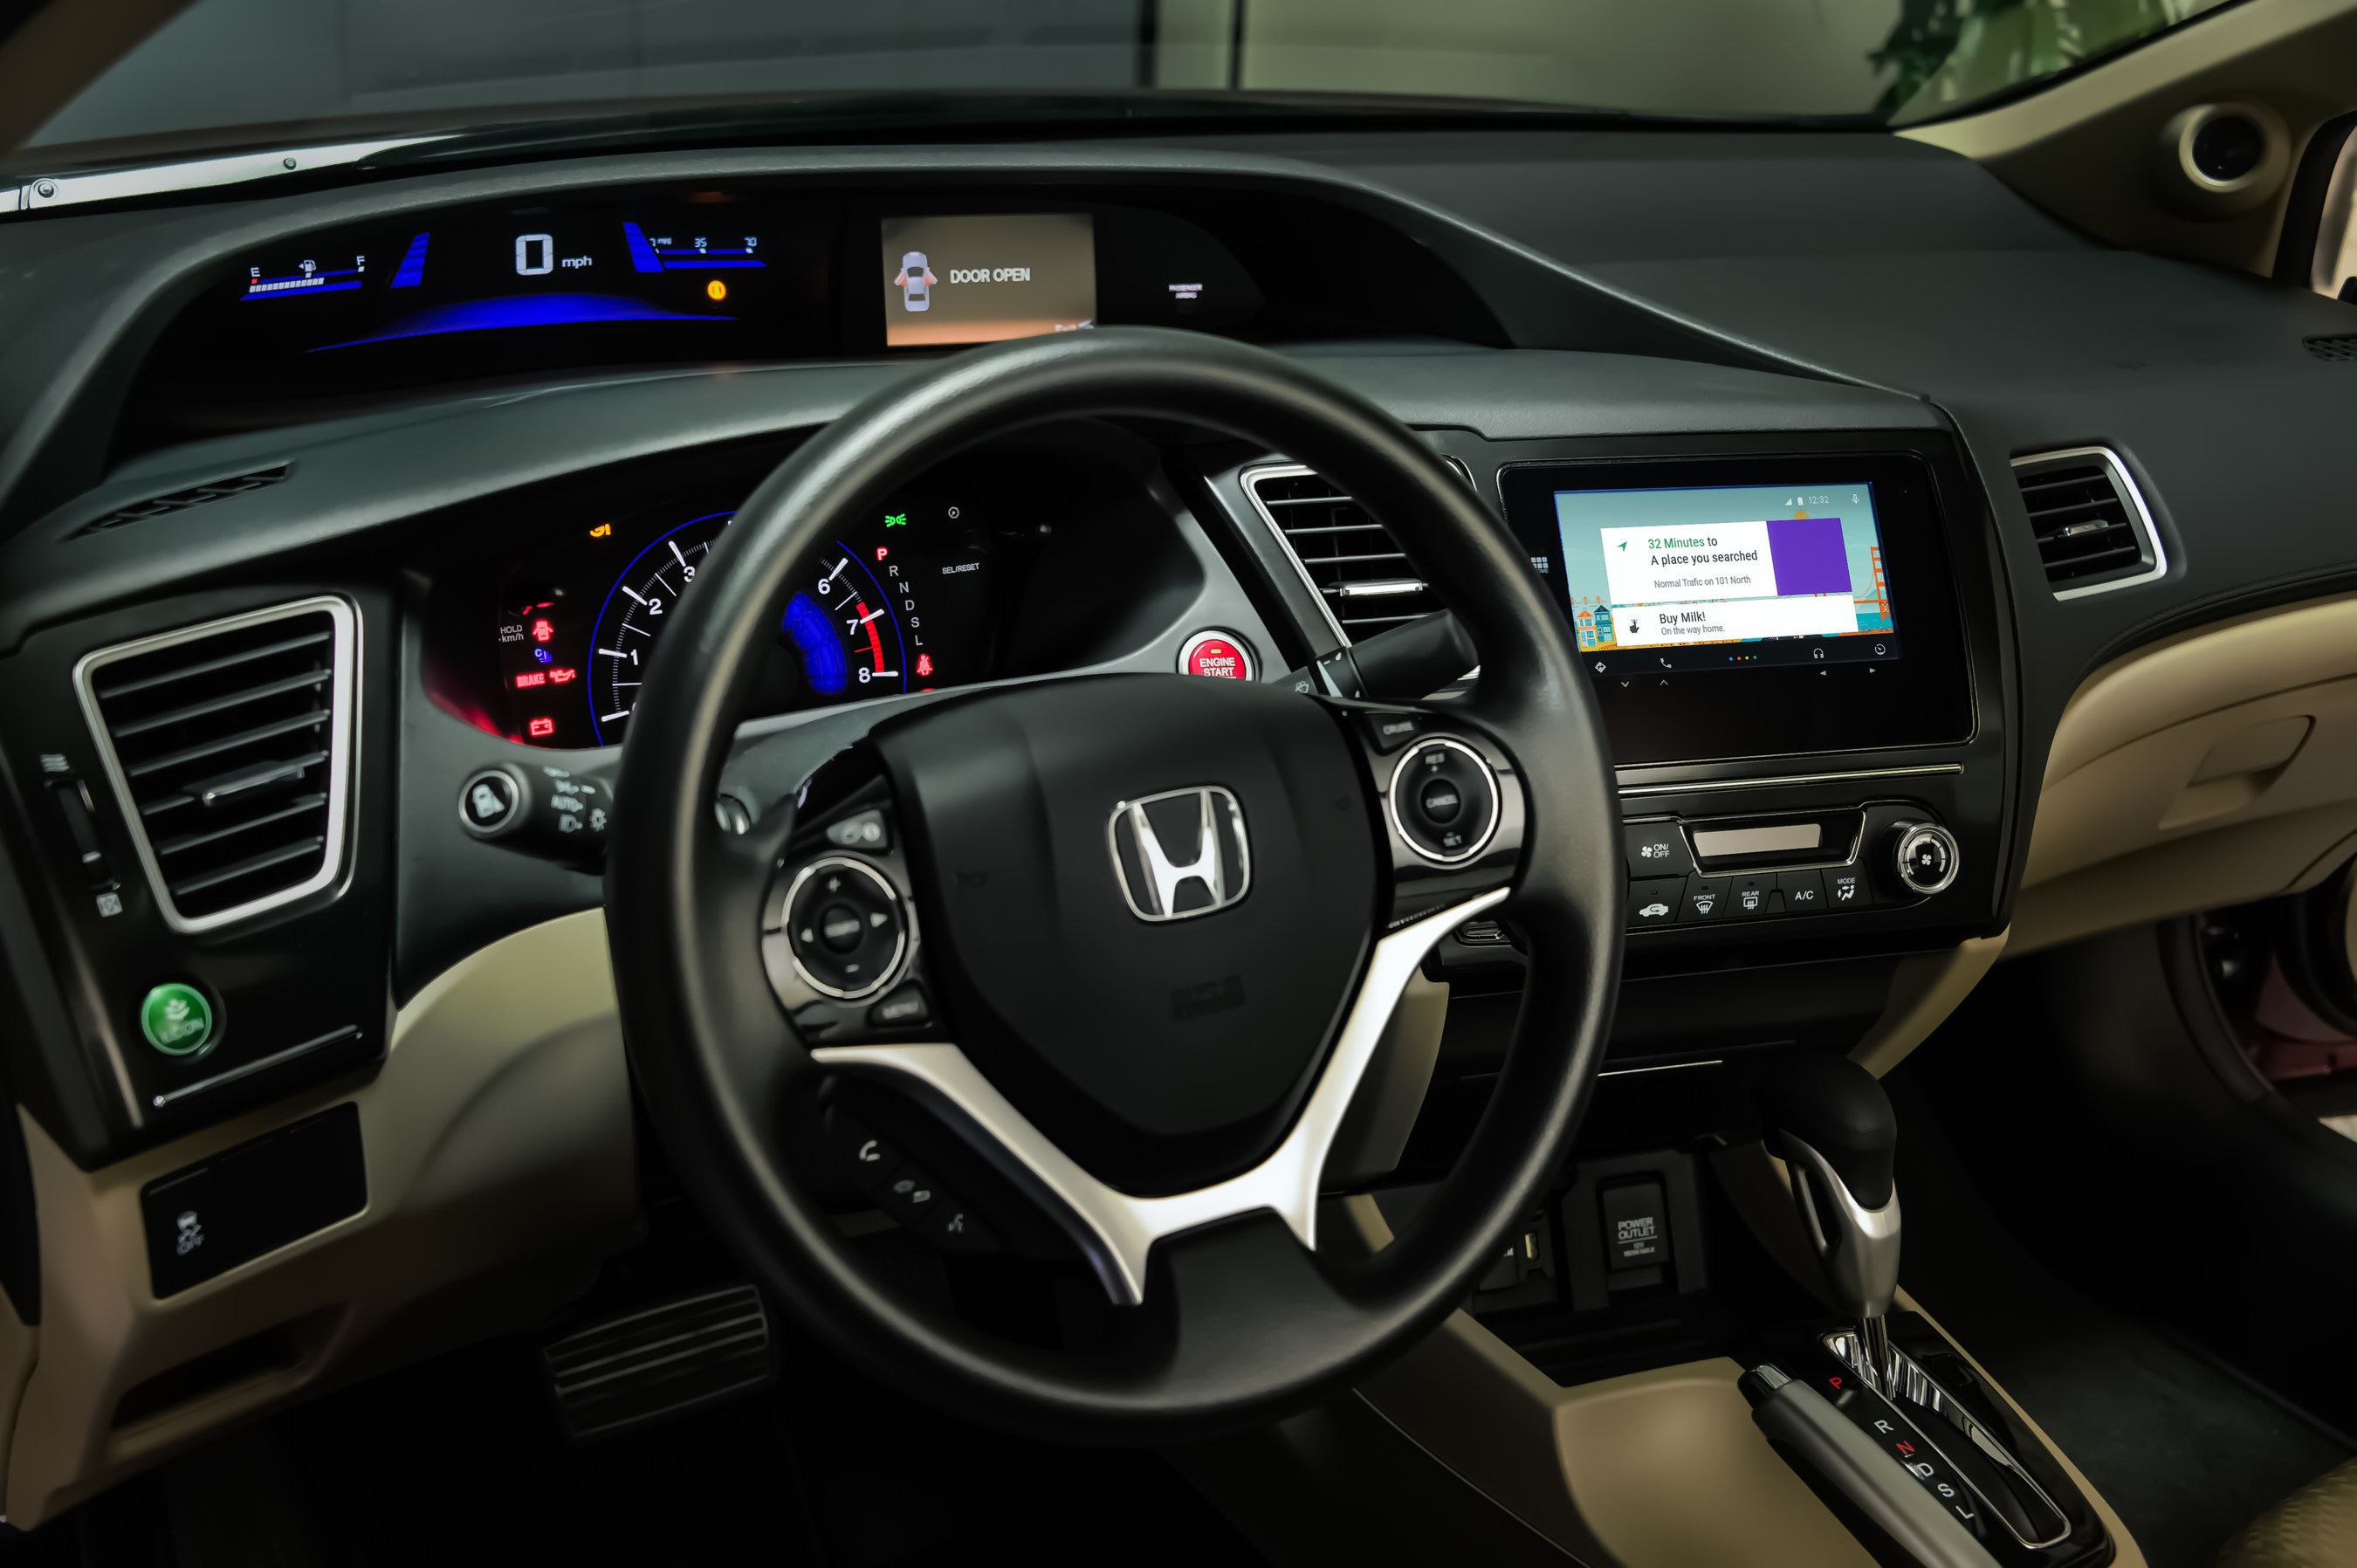 Honda has unveiled Honda Developer Studio, an online portal and open innovation workspace in Silicon Valley where developers can work directly with Honda engineers to create apps that are road-ready more quickly.